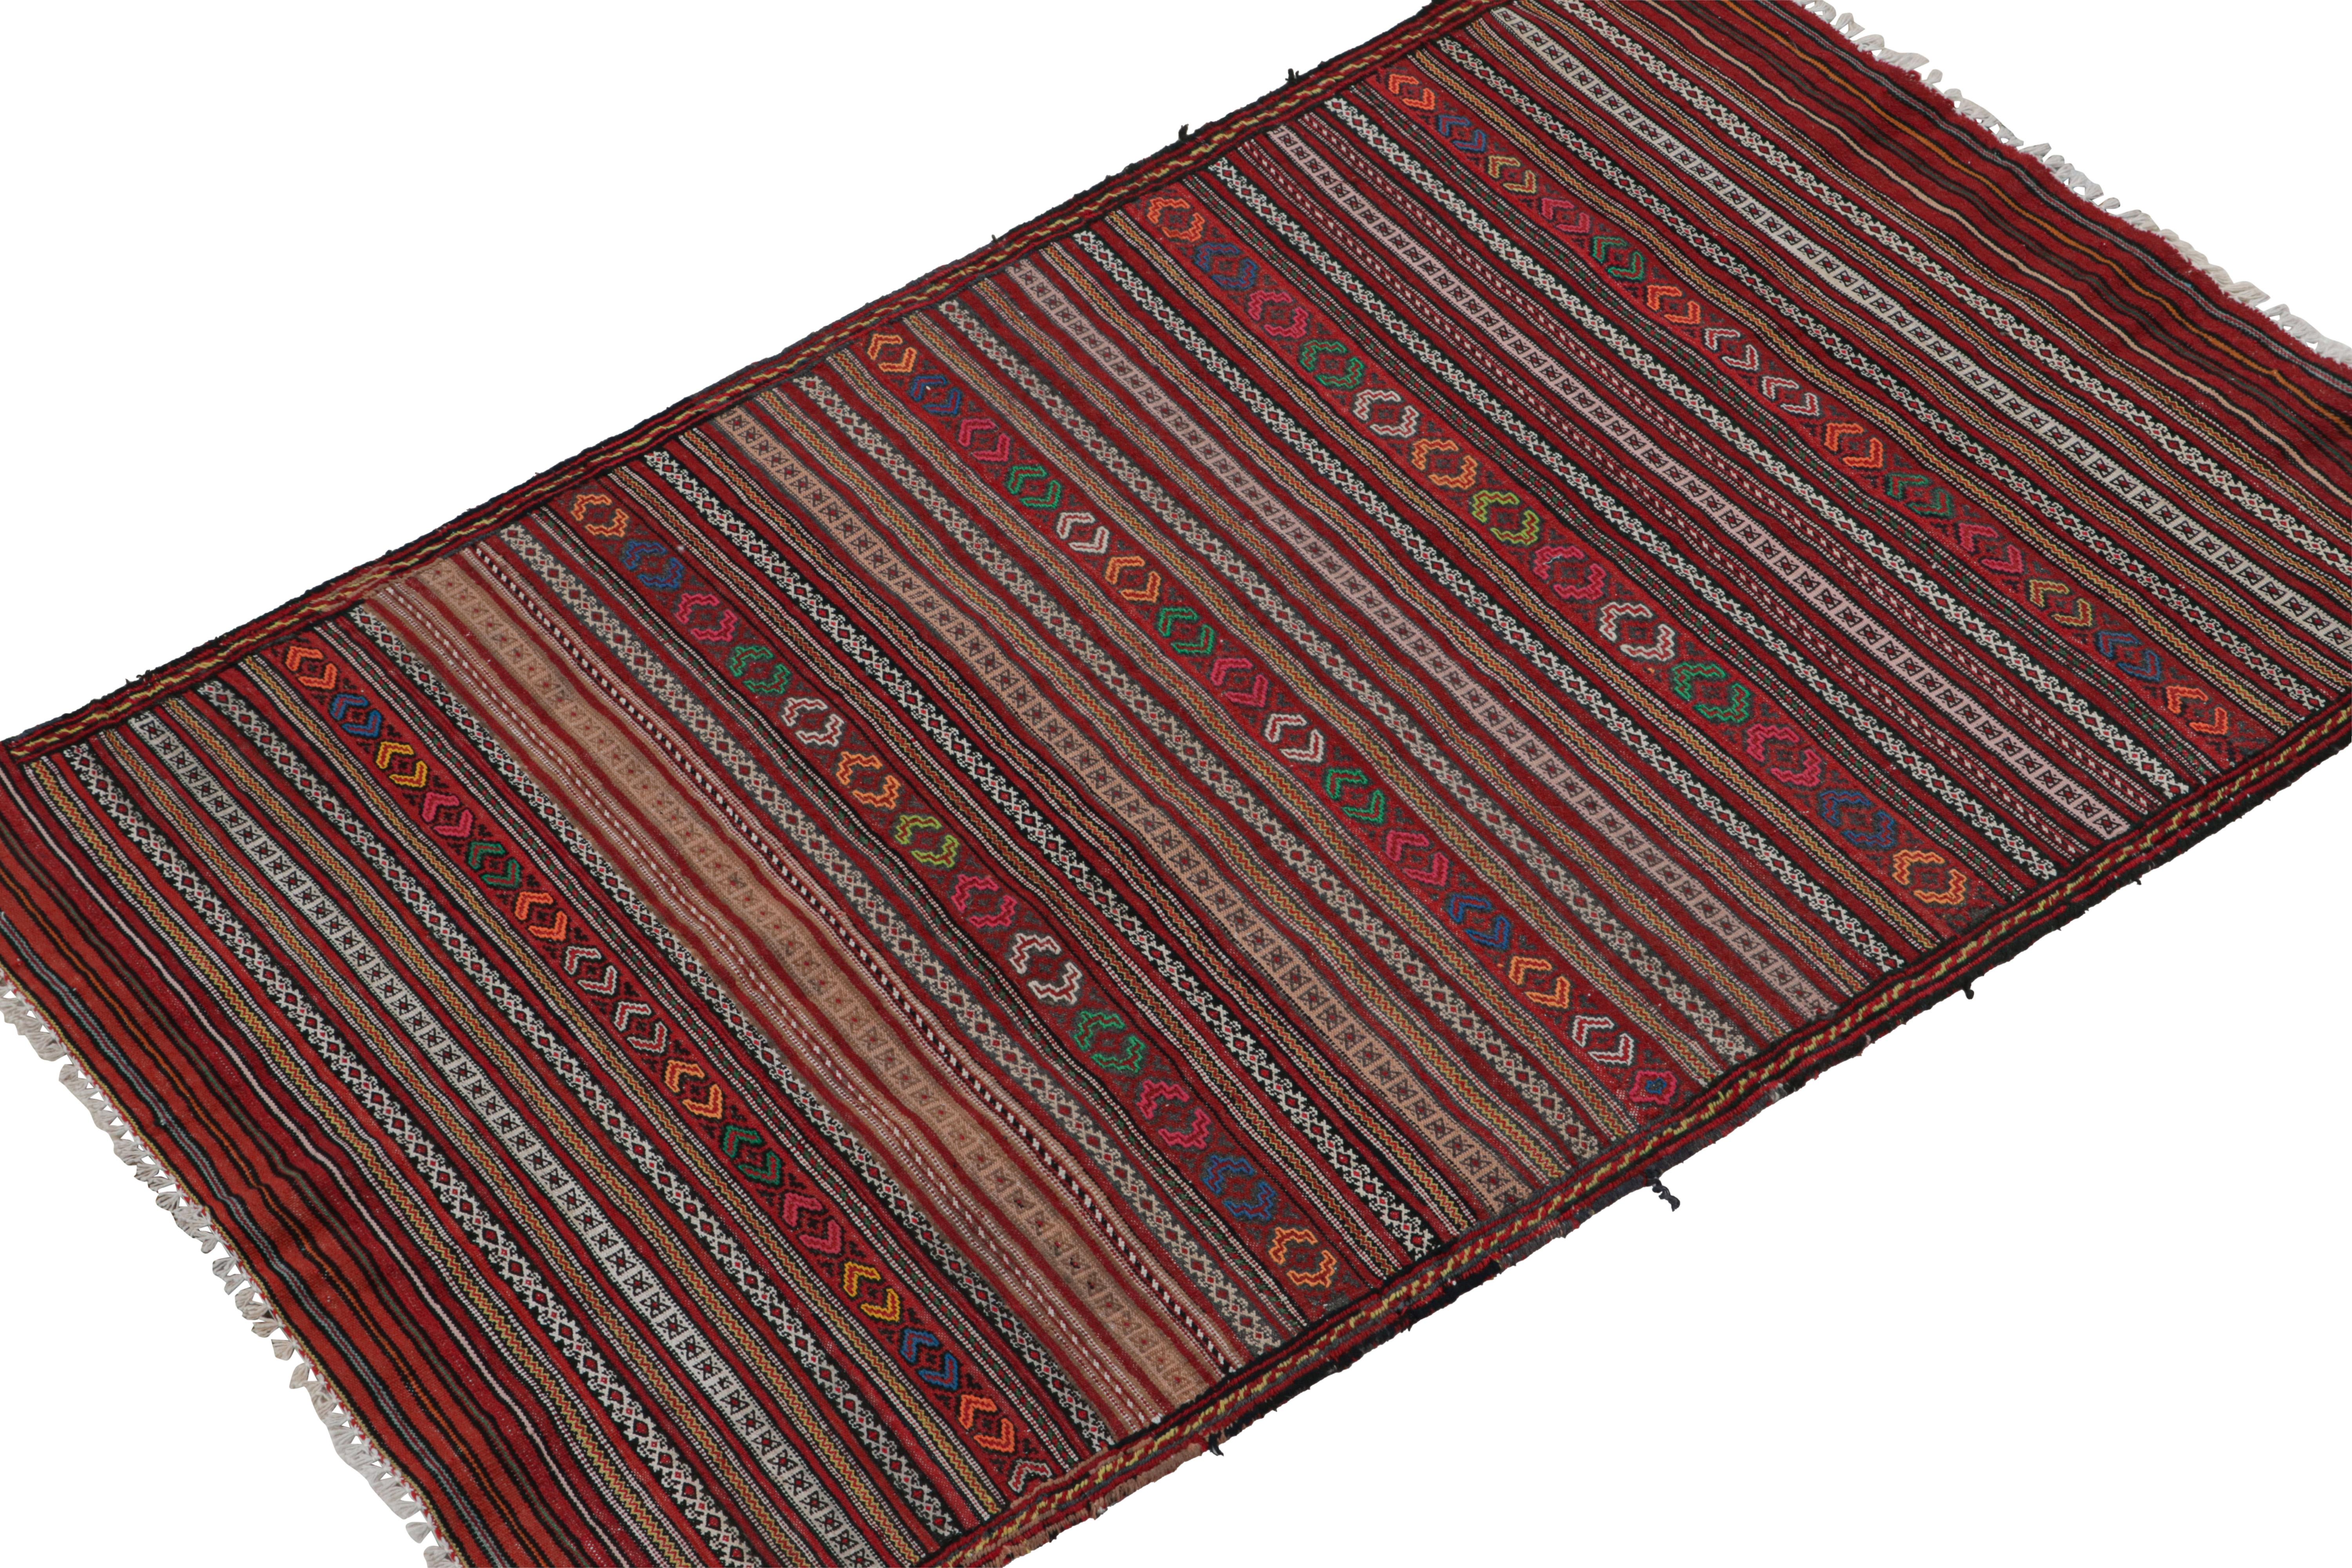 Handwoven in wool circa 1950-1960, this vintage tribal kilim rug from the Baluch tribe is the latest to join Rug & Kilim’s collection of coveted flatweaves. 

On the Design: 

Specifically believed to hail from the Leghari clan of the Baluch tribe,